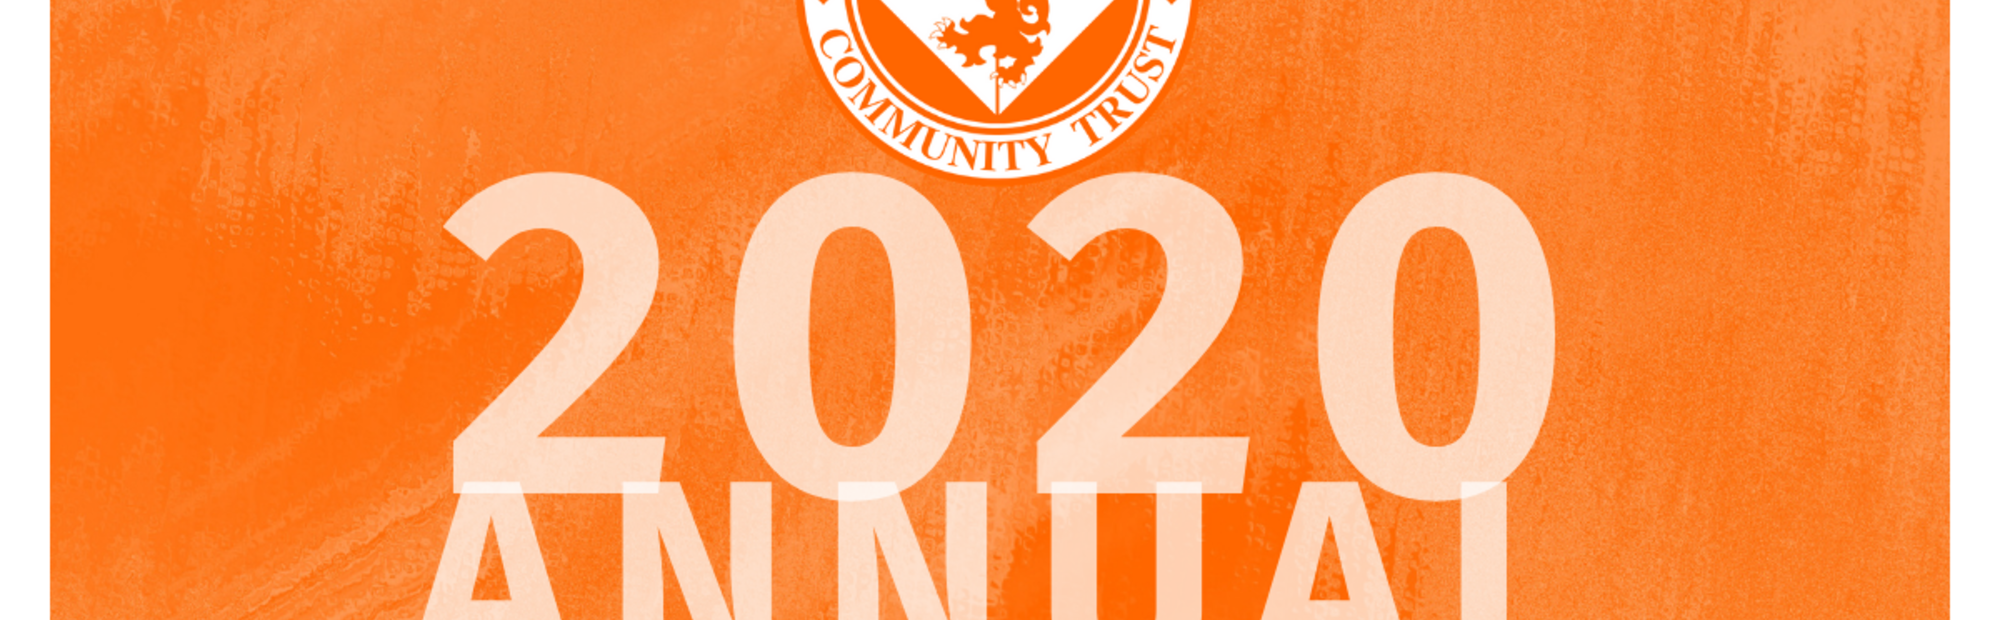 Dundee United Community Trust Annual Report Graphic